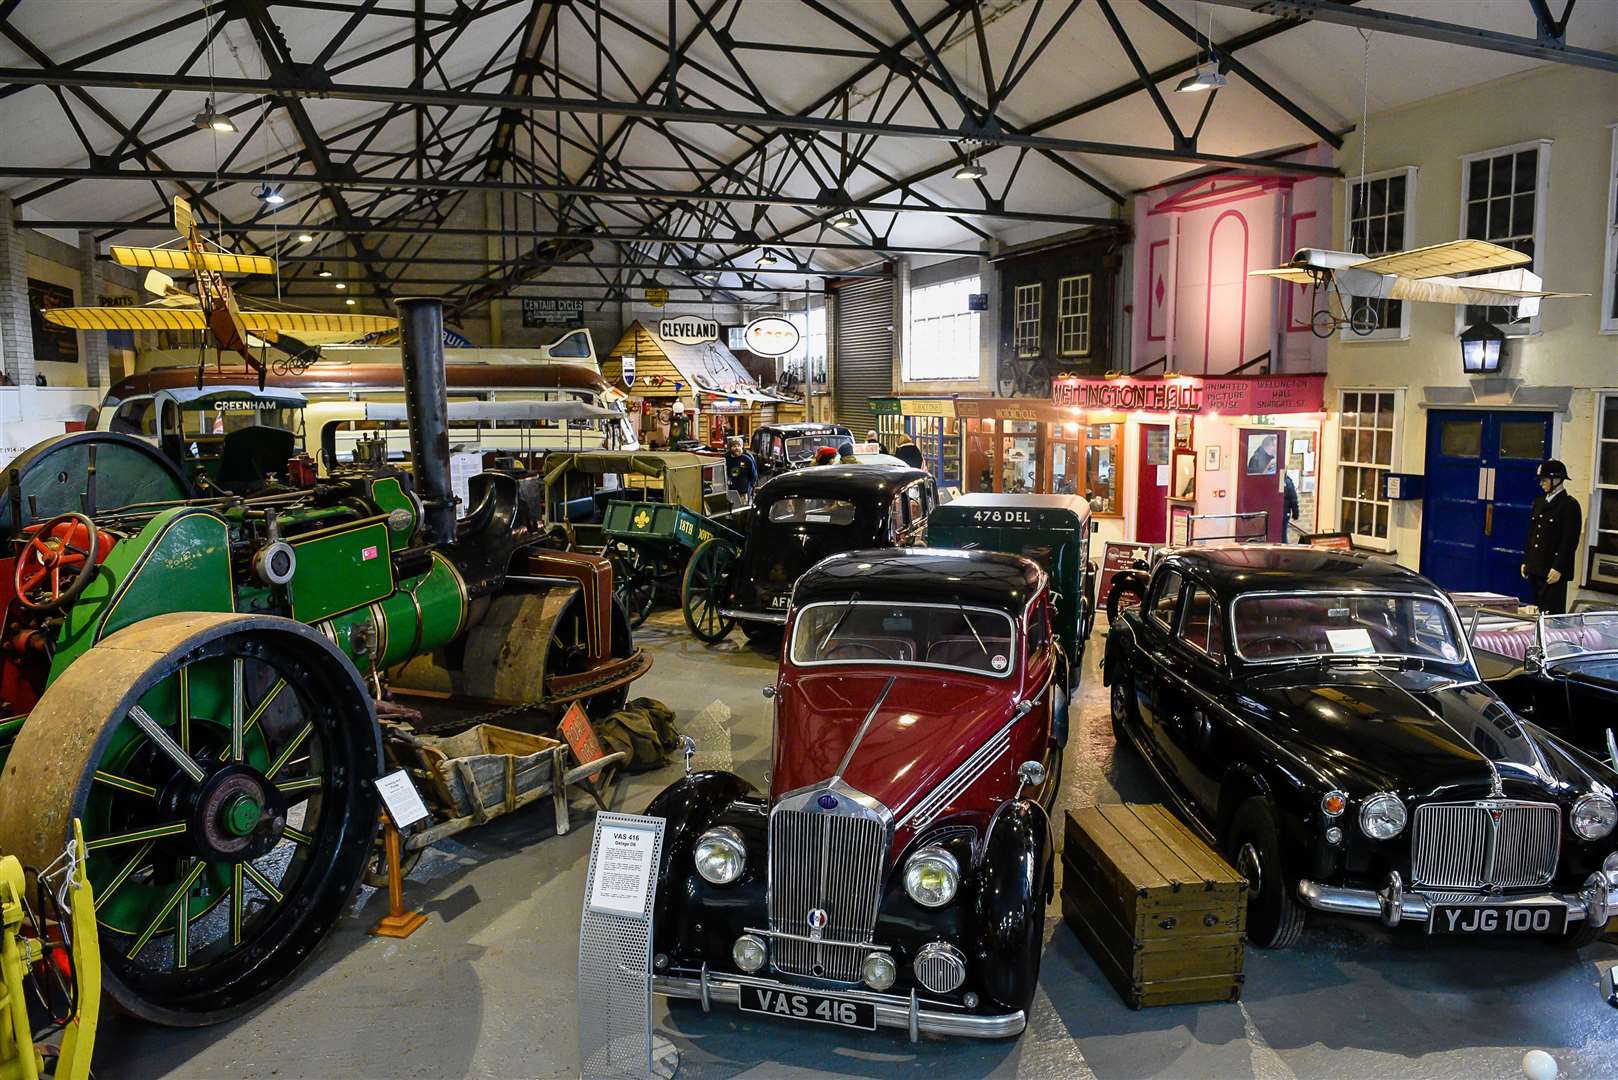 Dover Transport Museum has lots to see and do